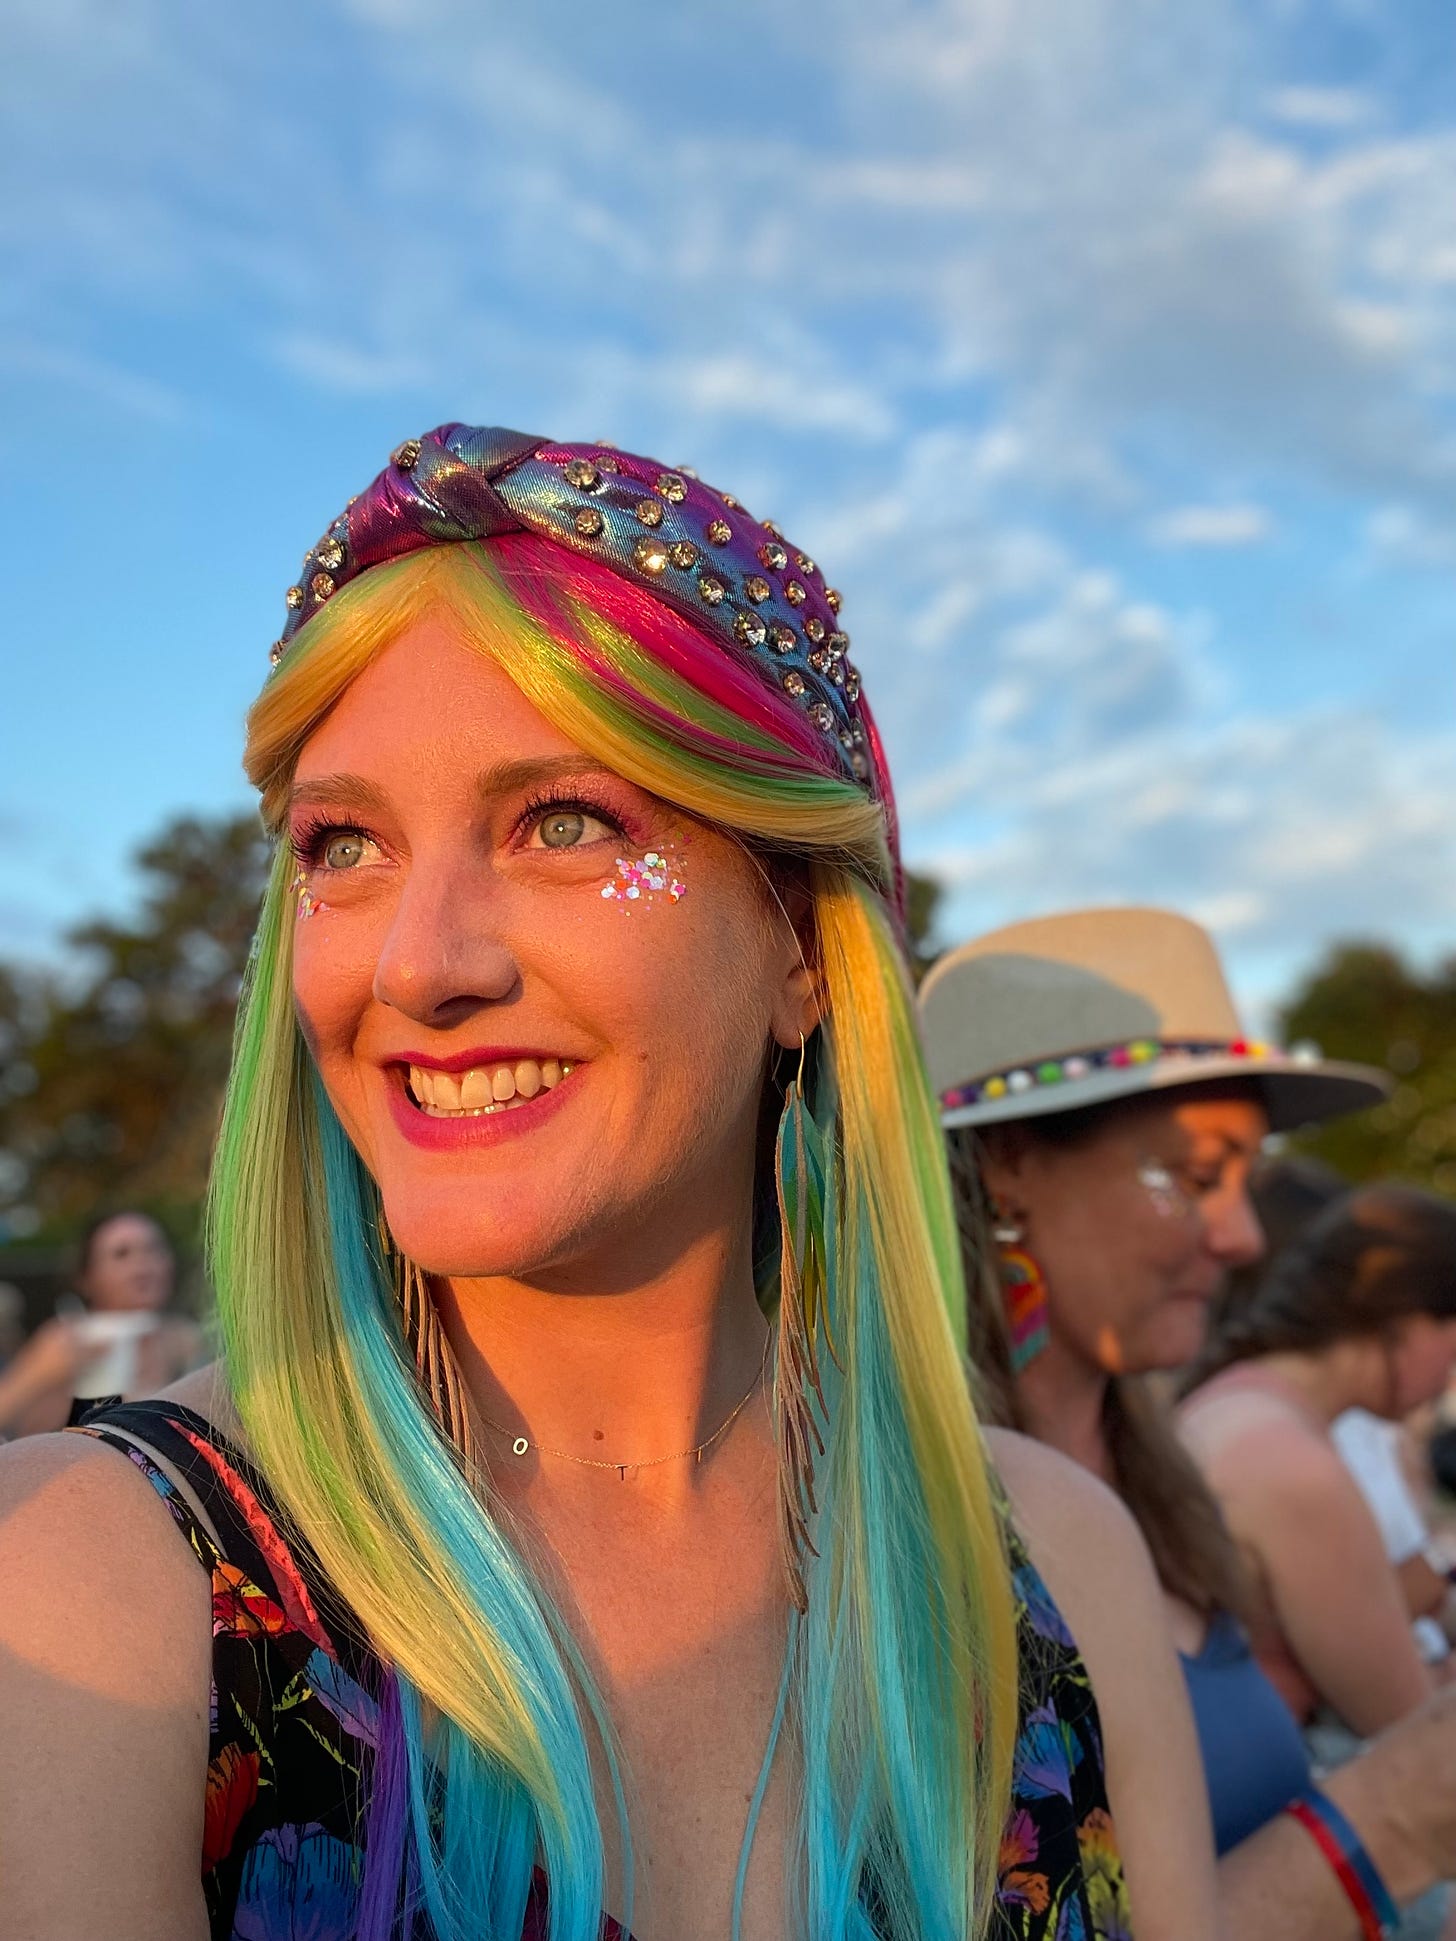 Becky wears a long, silky rainbow wig and a shimmering, rhinestoned headband. She beams into the distance, chunky glittery shimmering below her green eyes. Soft clouds float across the blue sky behind her and a friend in a fun hat is over her shoulder.